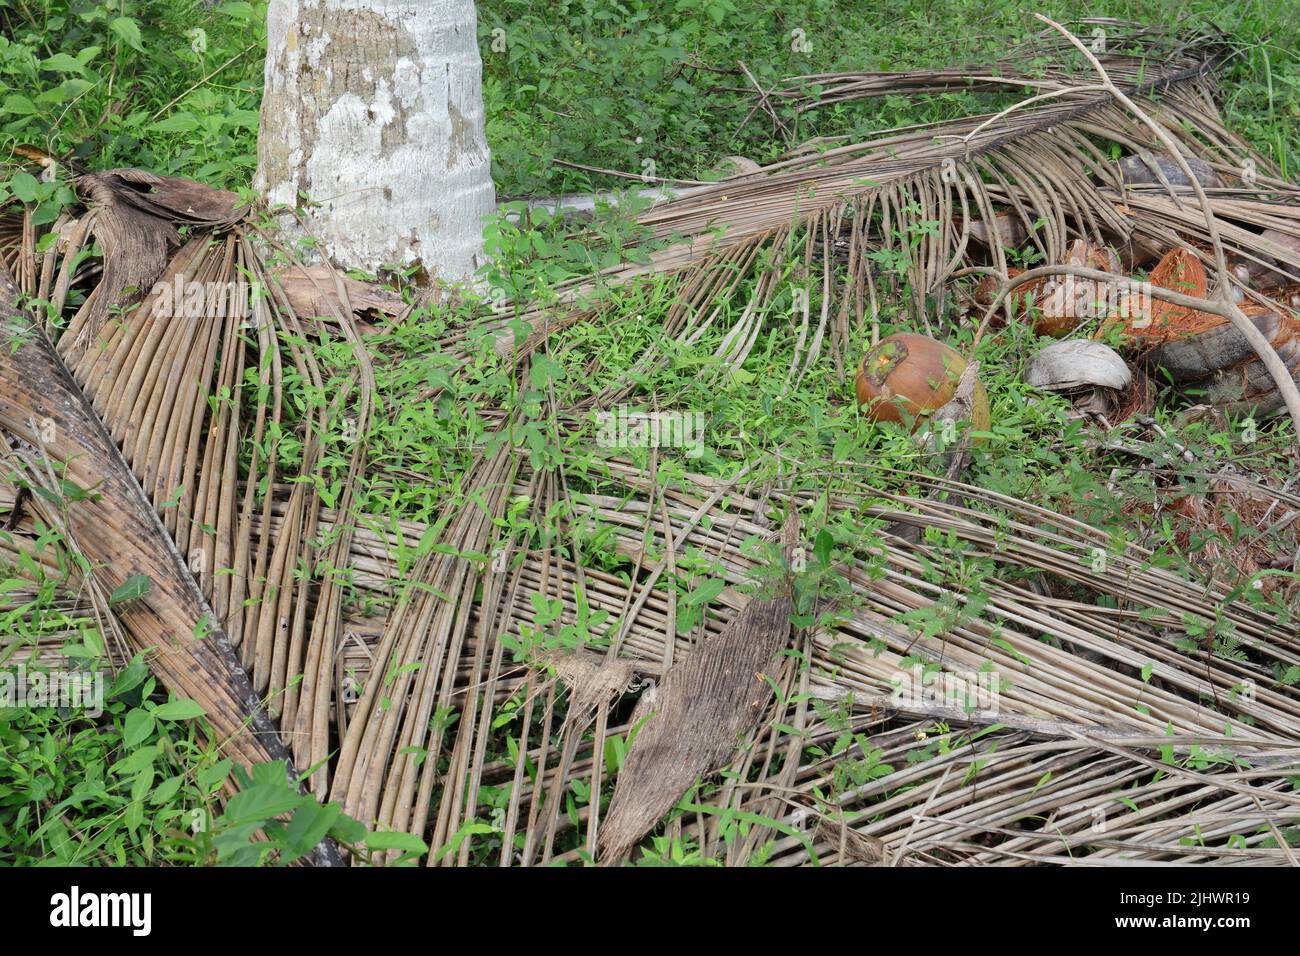 A base view of coconut palm with a fallen coconut close to the tree at the coconut plantation in Sri Lanka. Stock Photo